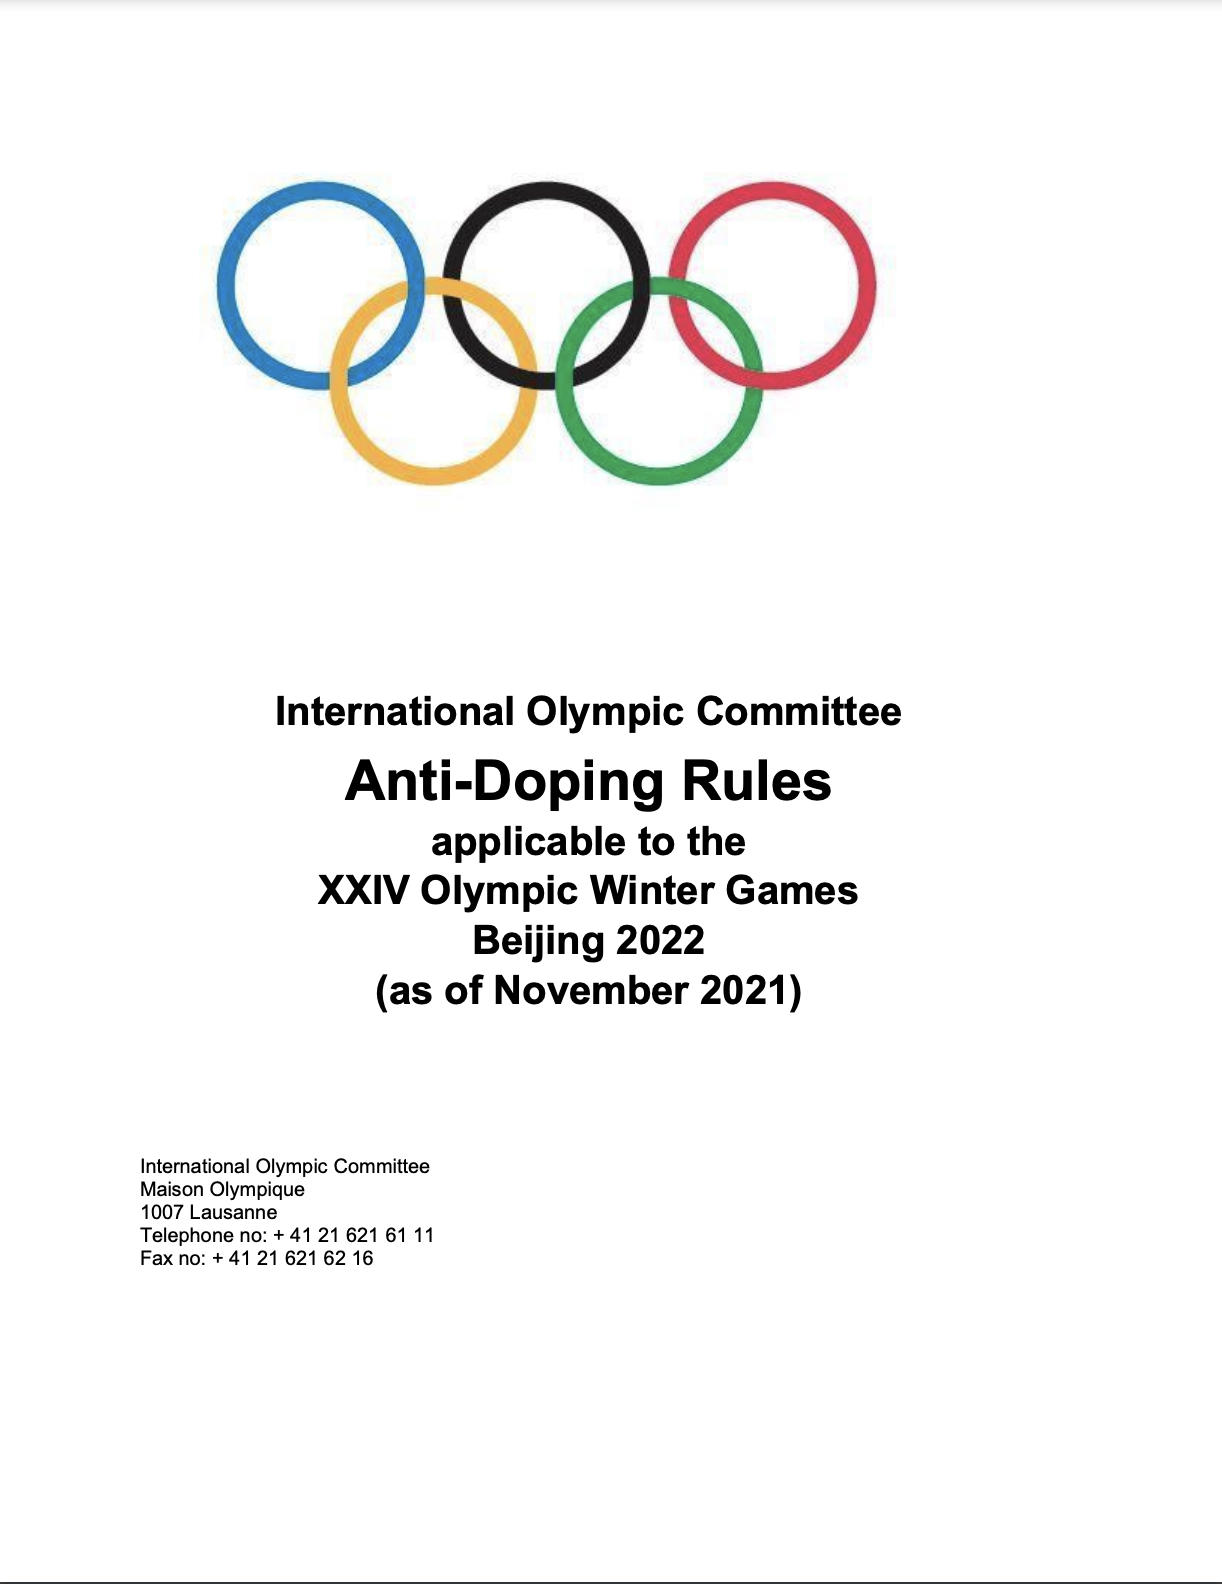 Anti-Doping Rules for the Olympic Winter Games Beijing 2022